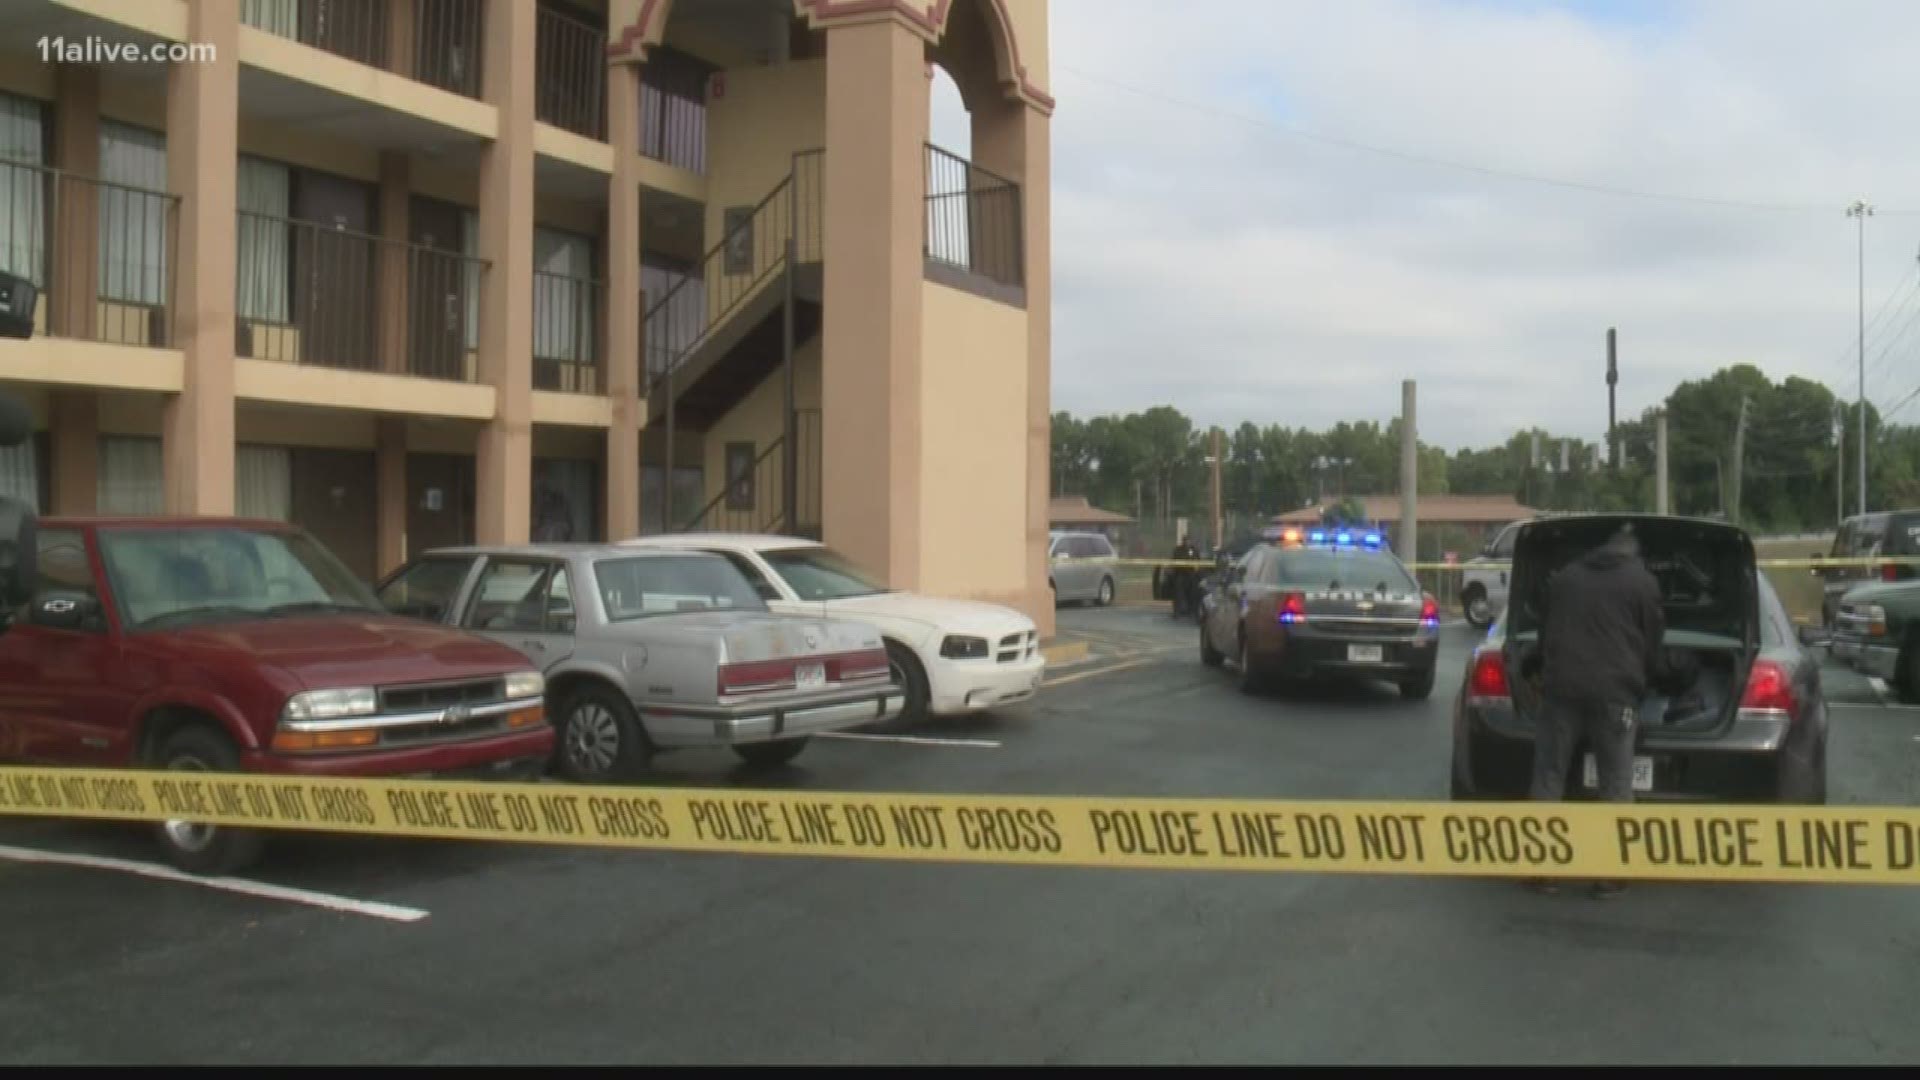 DeKalb County Police Public Information Officer Jacques Spencer told reporters the two men shot were contract workers at the hotel, who had just arrived around 9:30